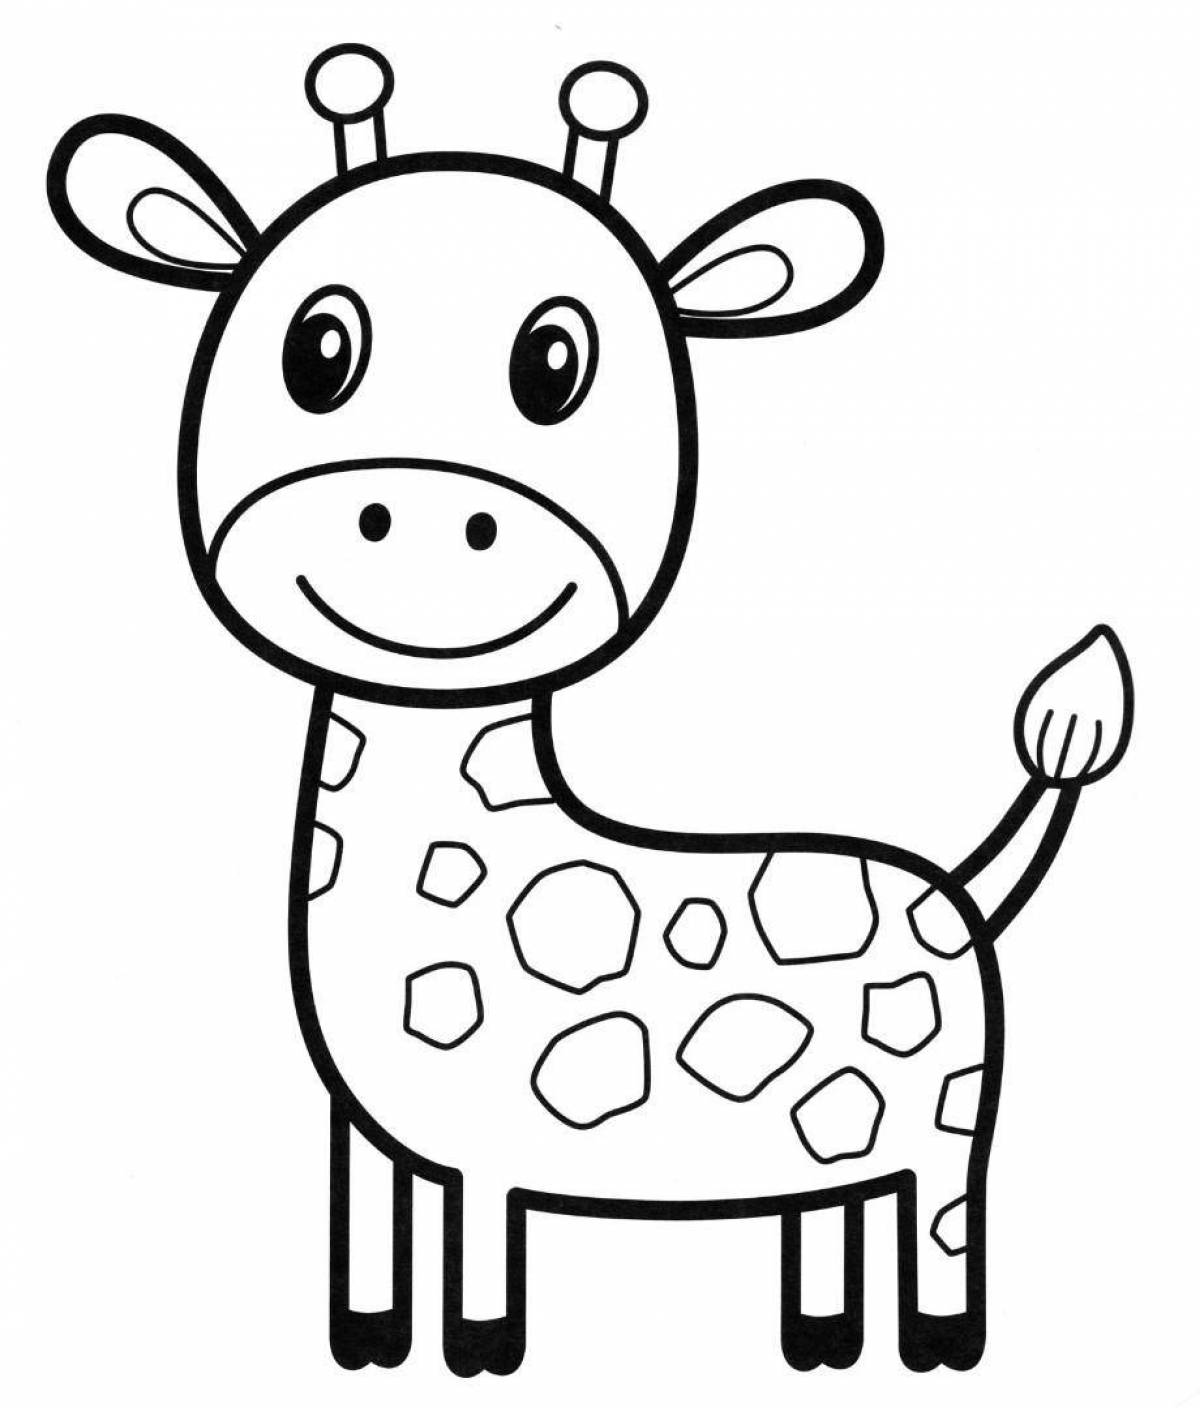 Colorful giraffe coloring book for 2-3 year olds